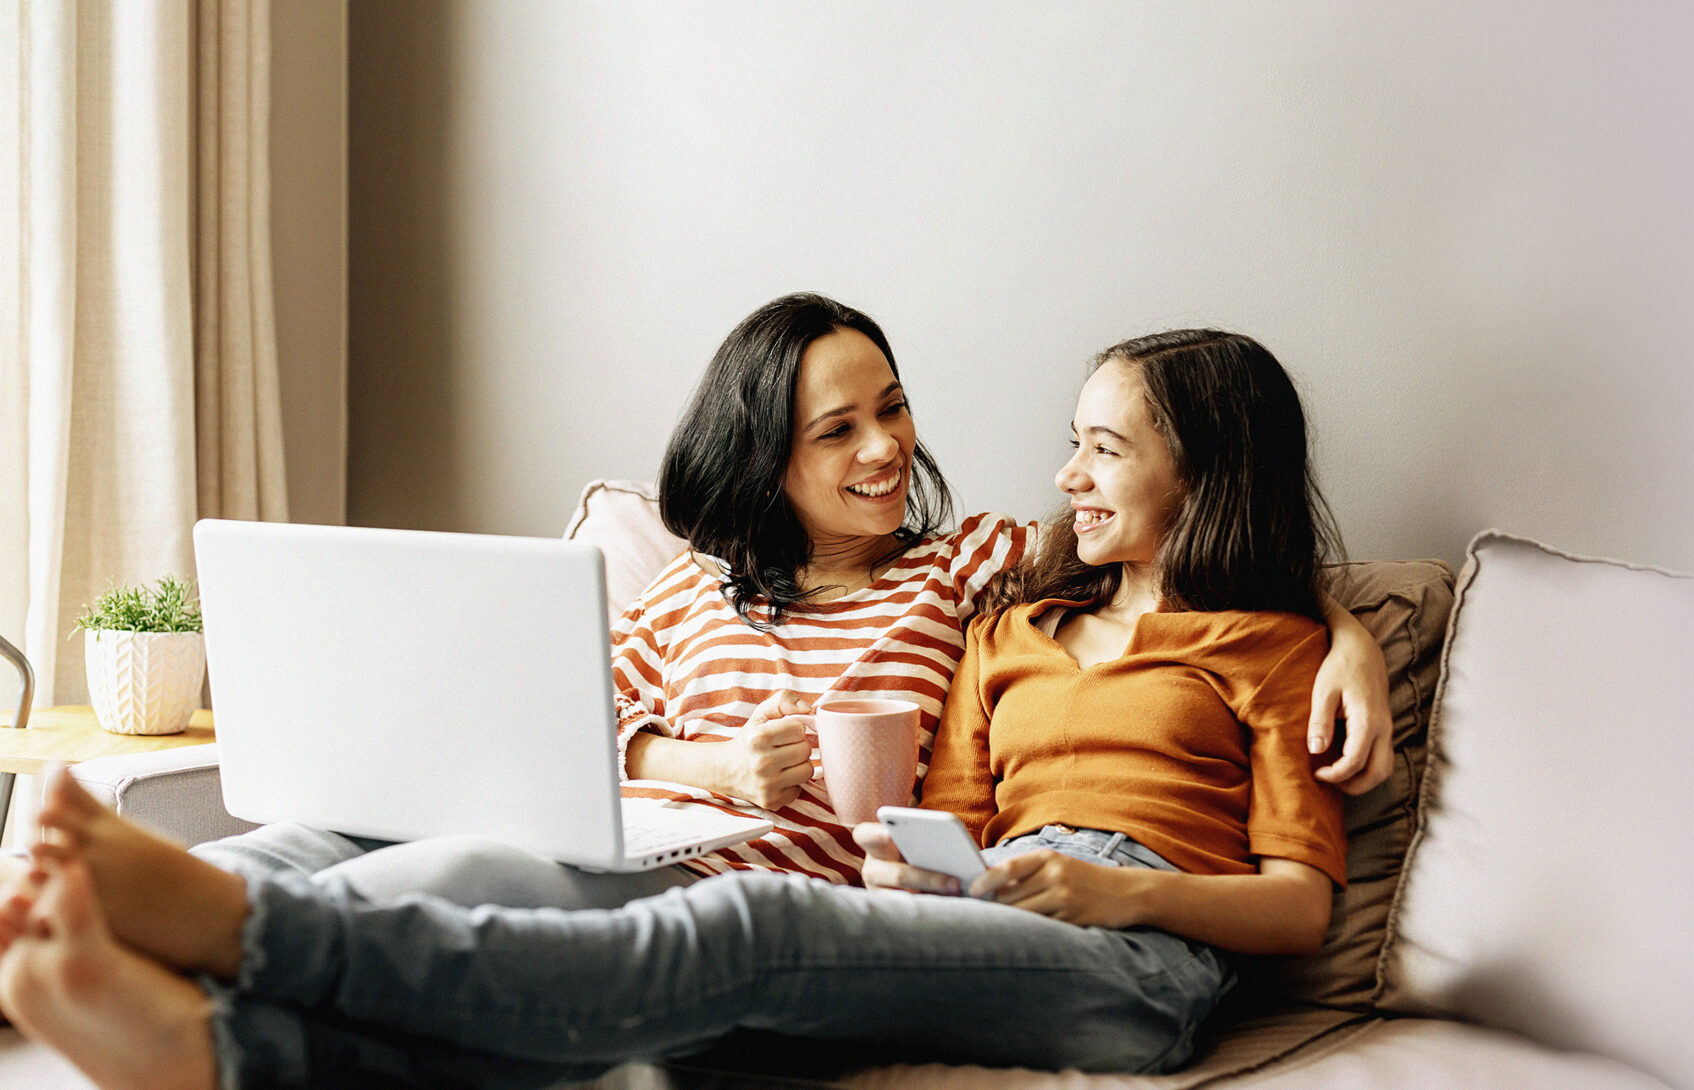 A mom and daughter sitting on a couch together smiling at each other, holding a laptop and a cell phone